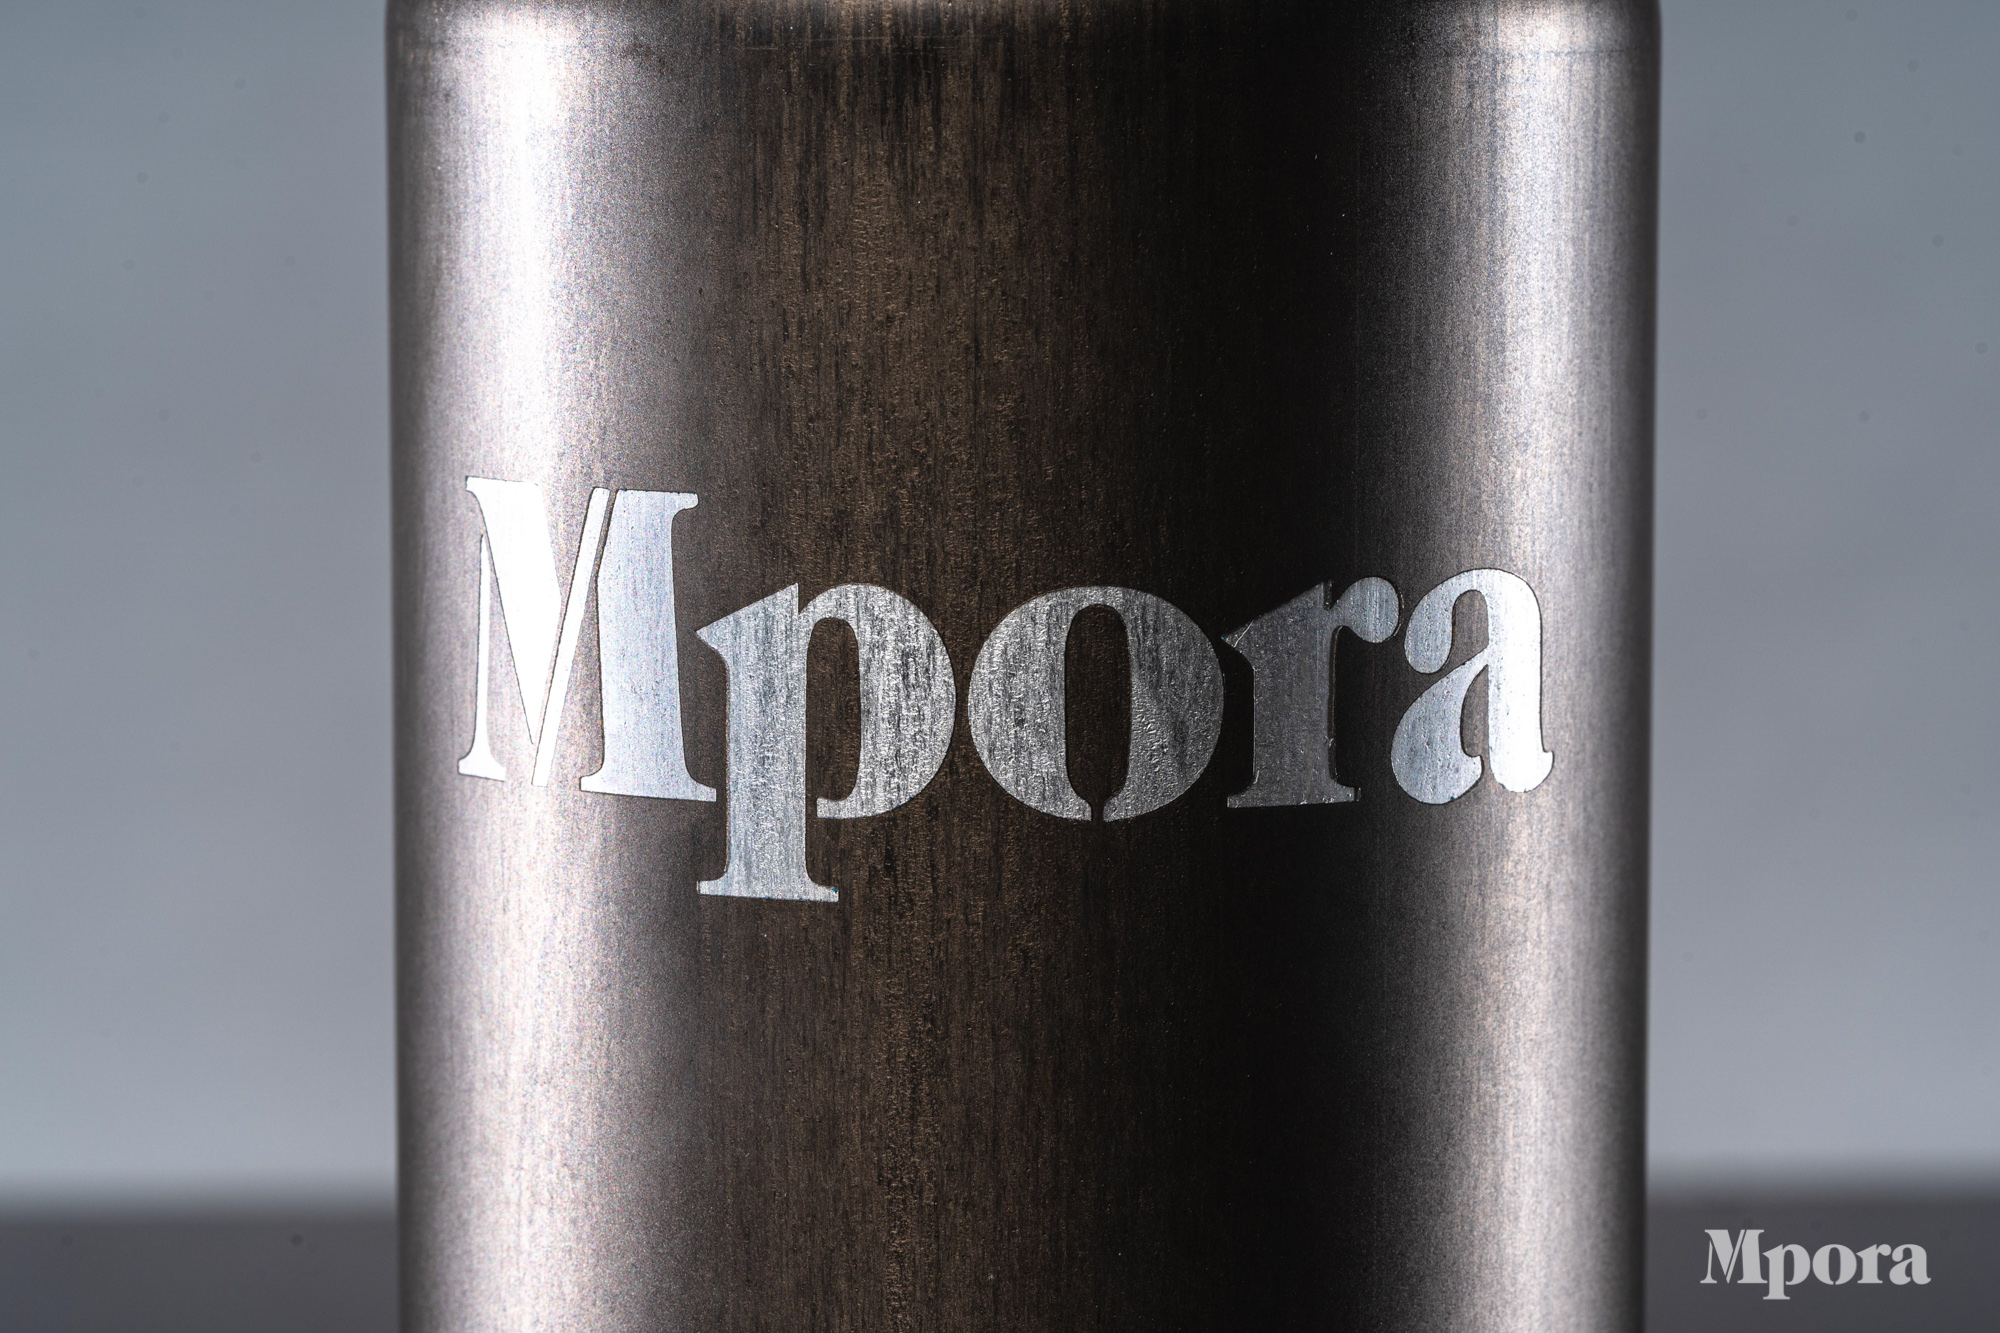 sigg-mpora-waterbottle-review